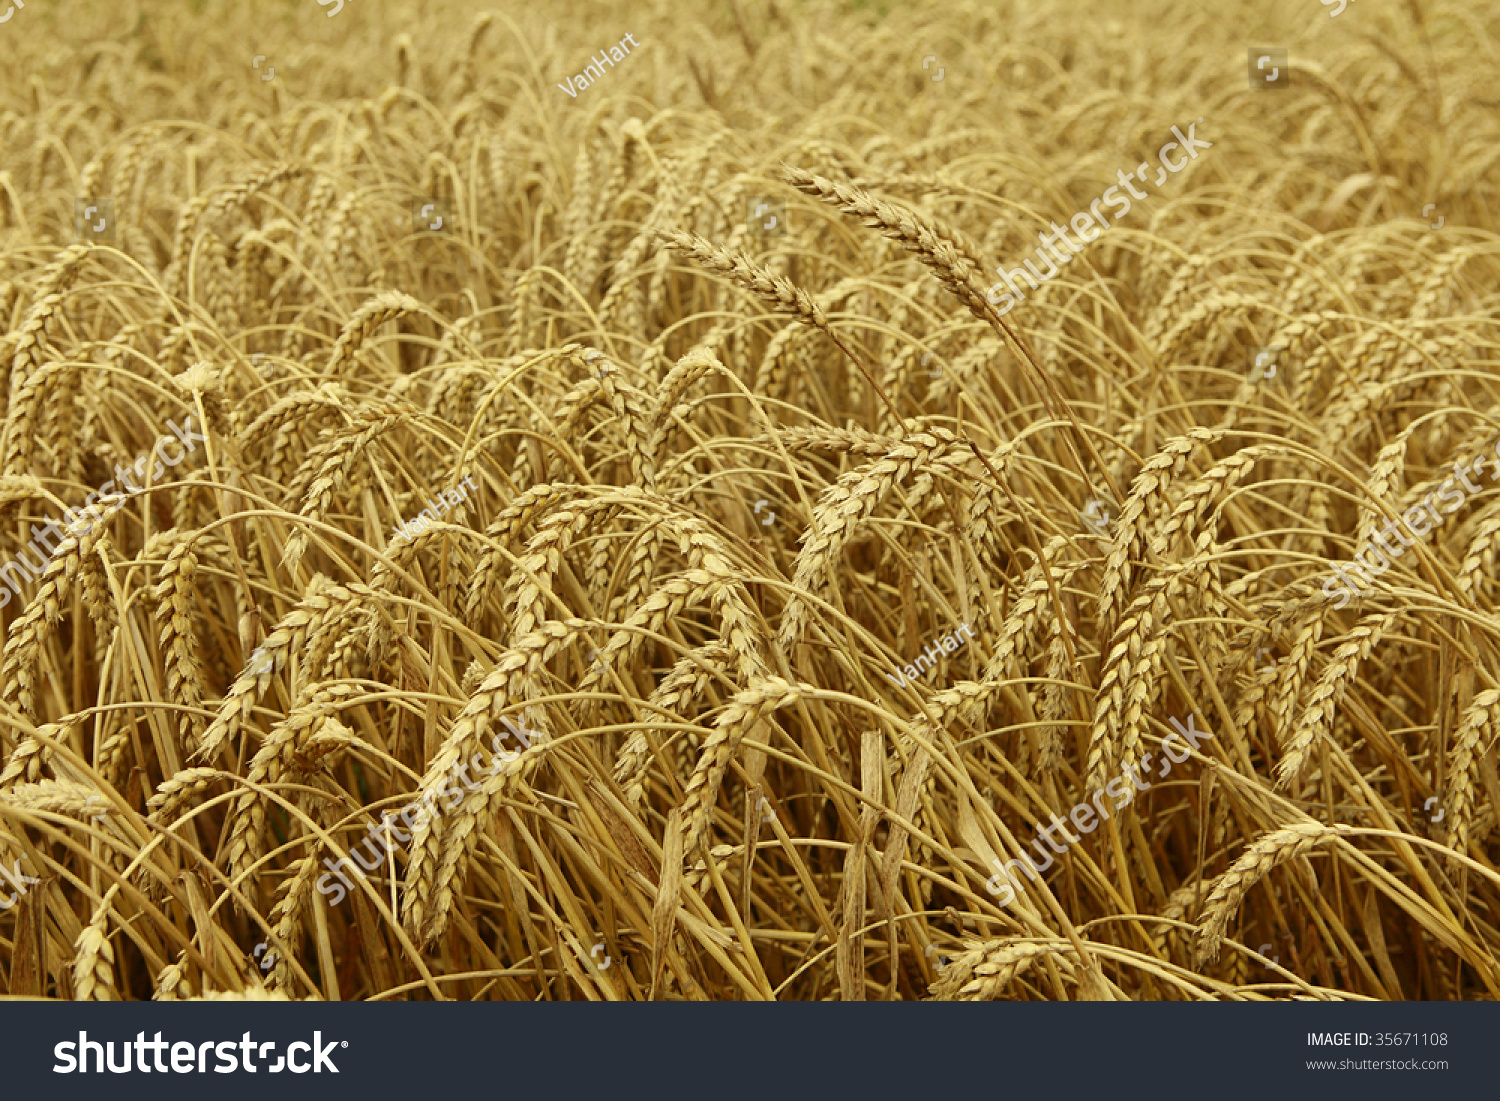 Wheat ready to be harvested #35671108